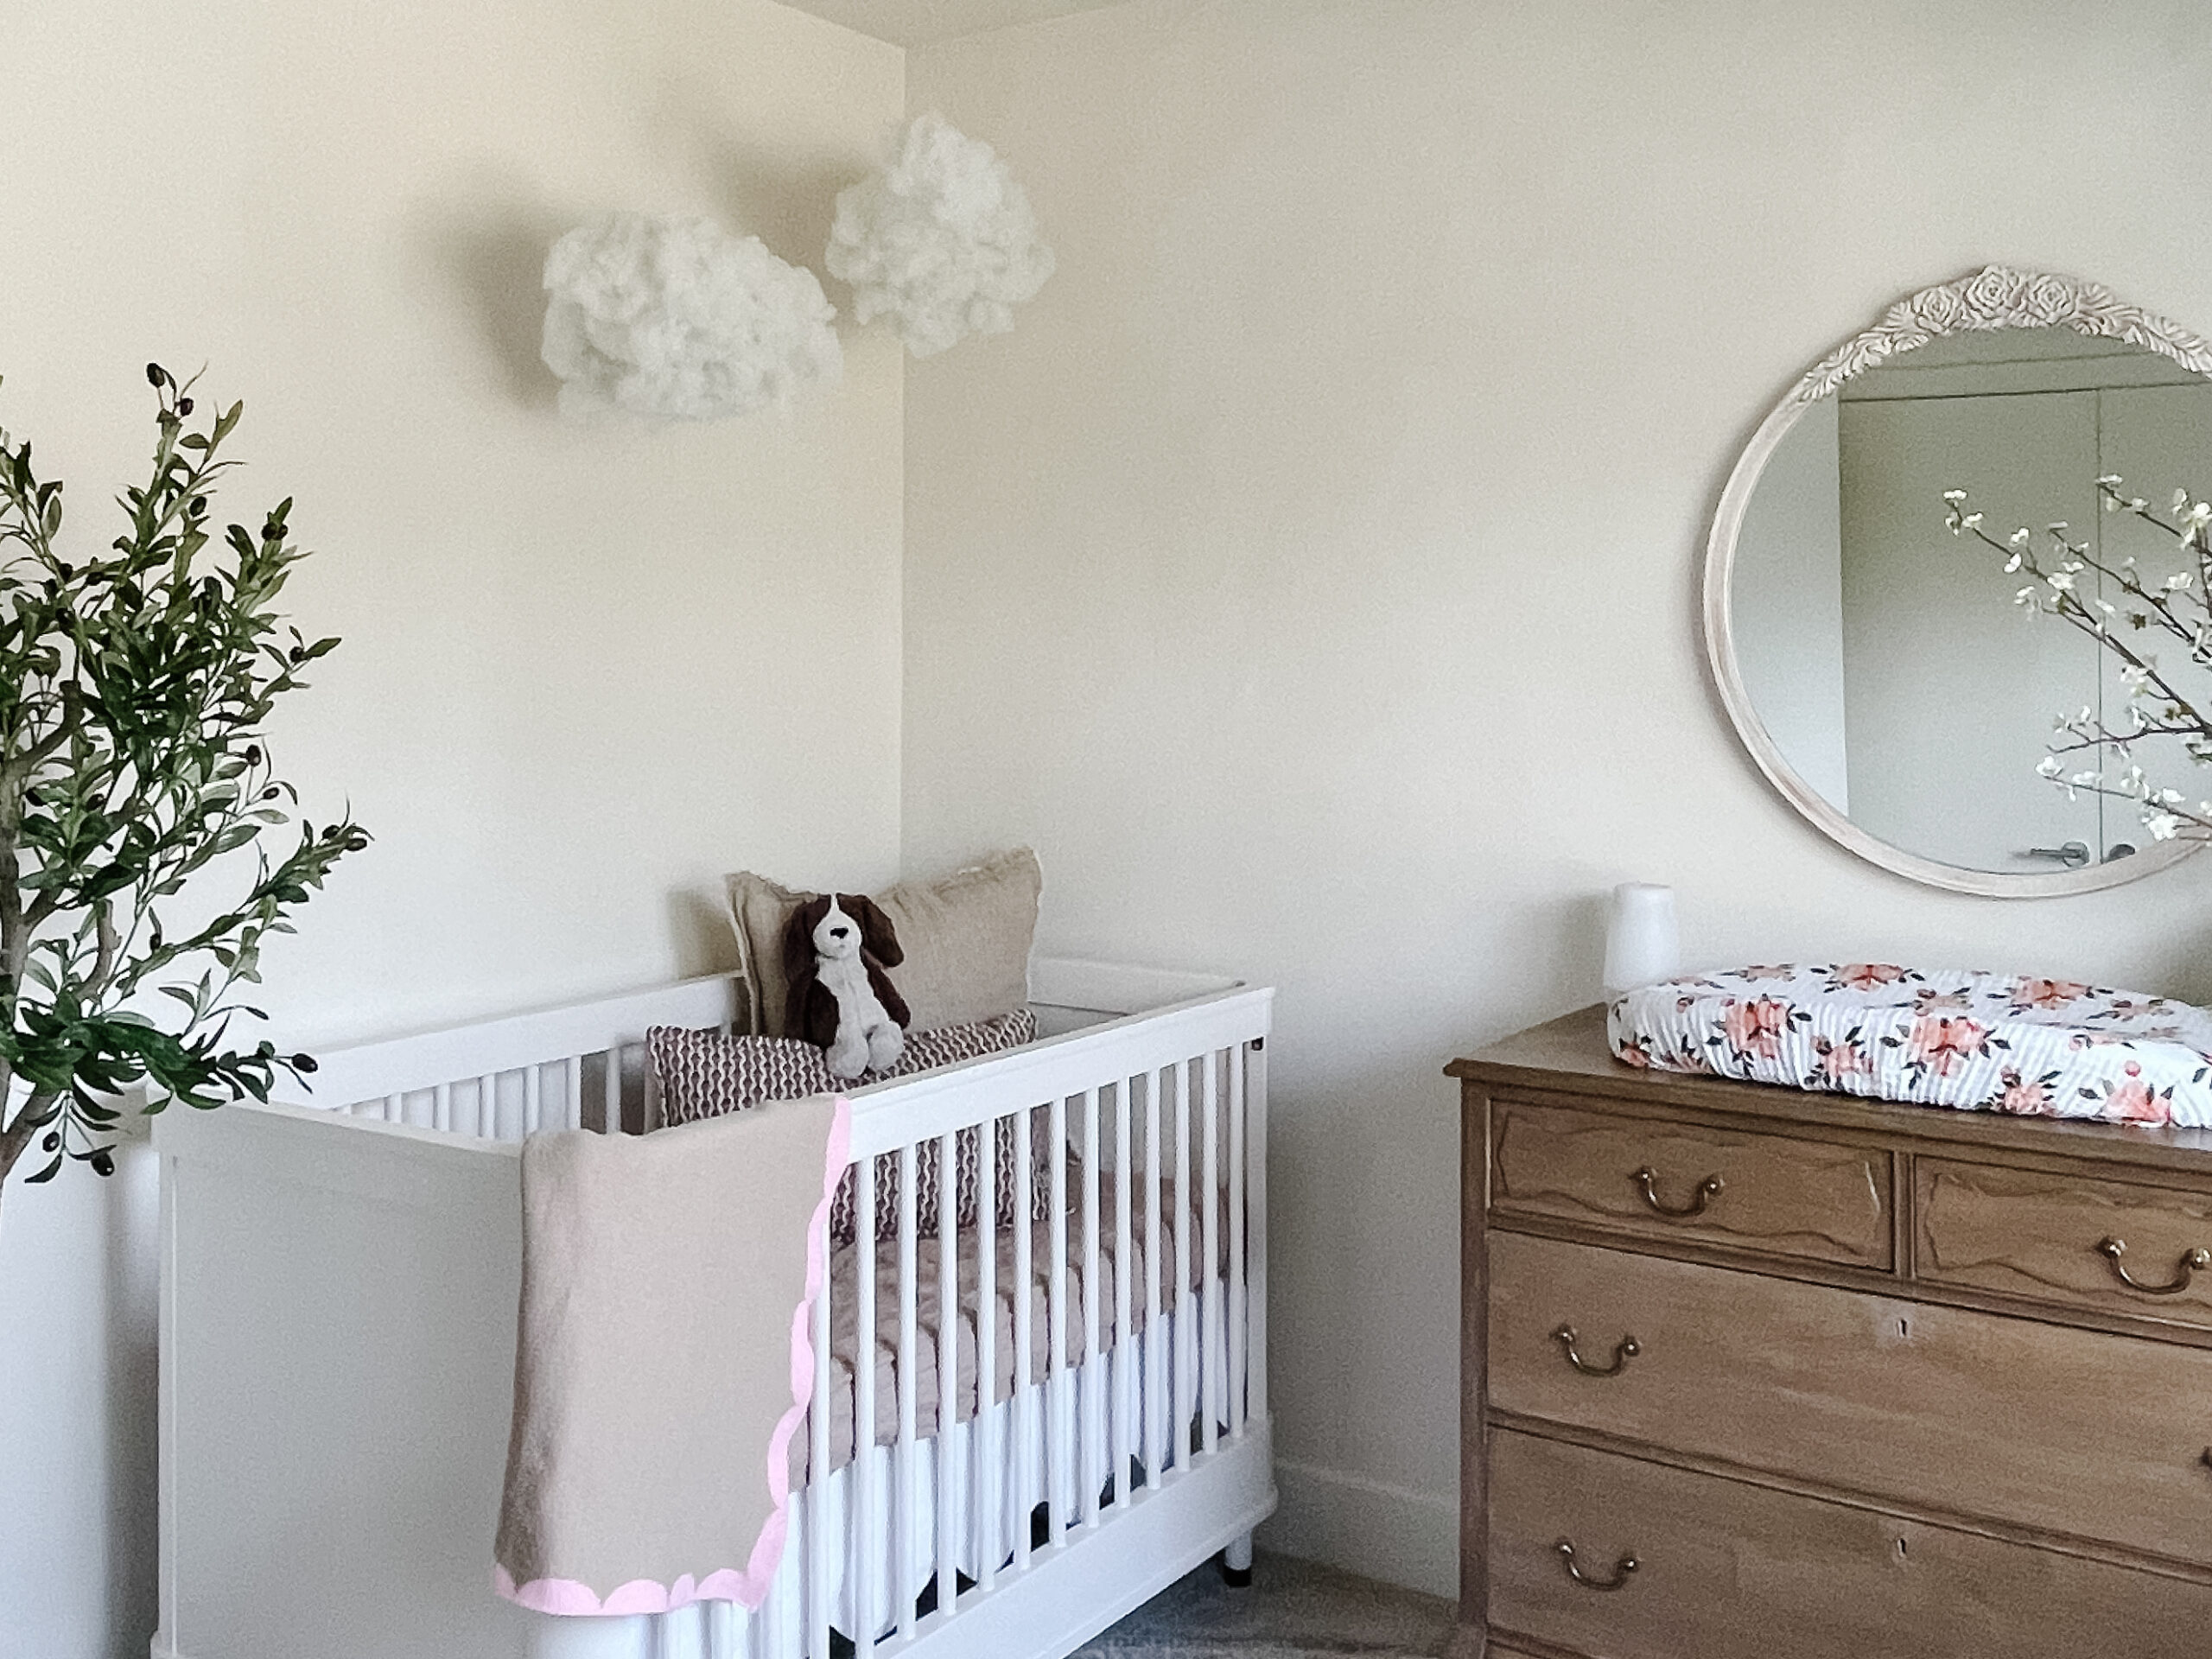 Calming nursery reveal with lime washed walls, an antiqued upcyled dresser, faux clouds, olive tree, and distressed mirror. All in small spaces